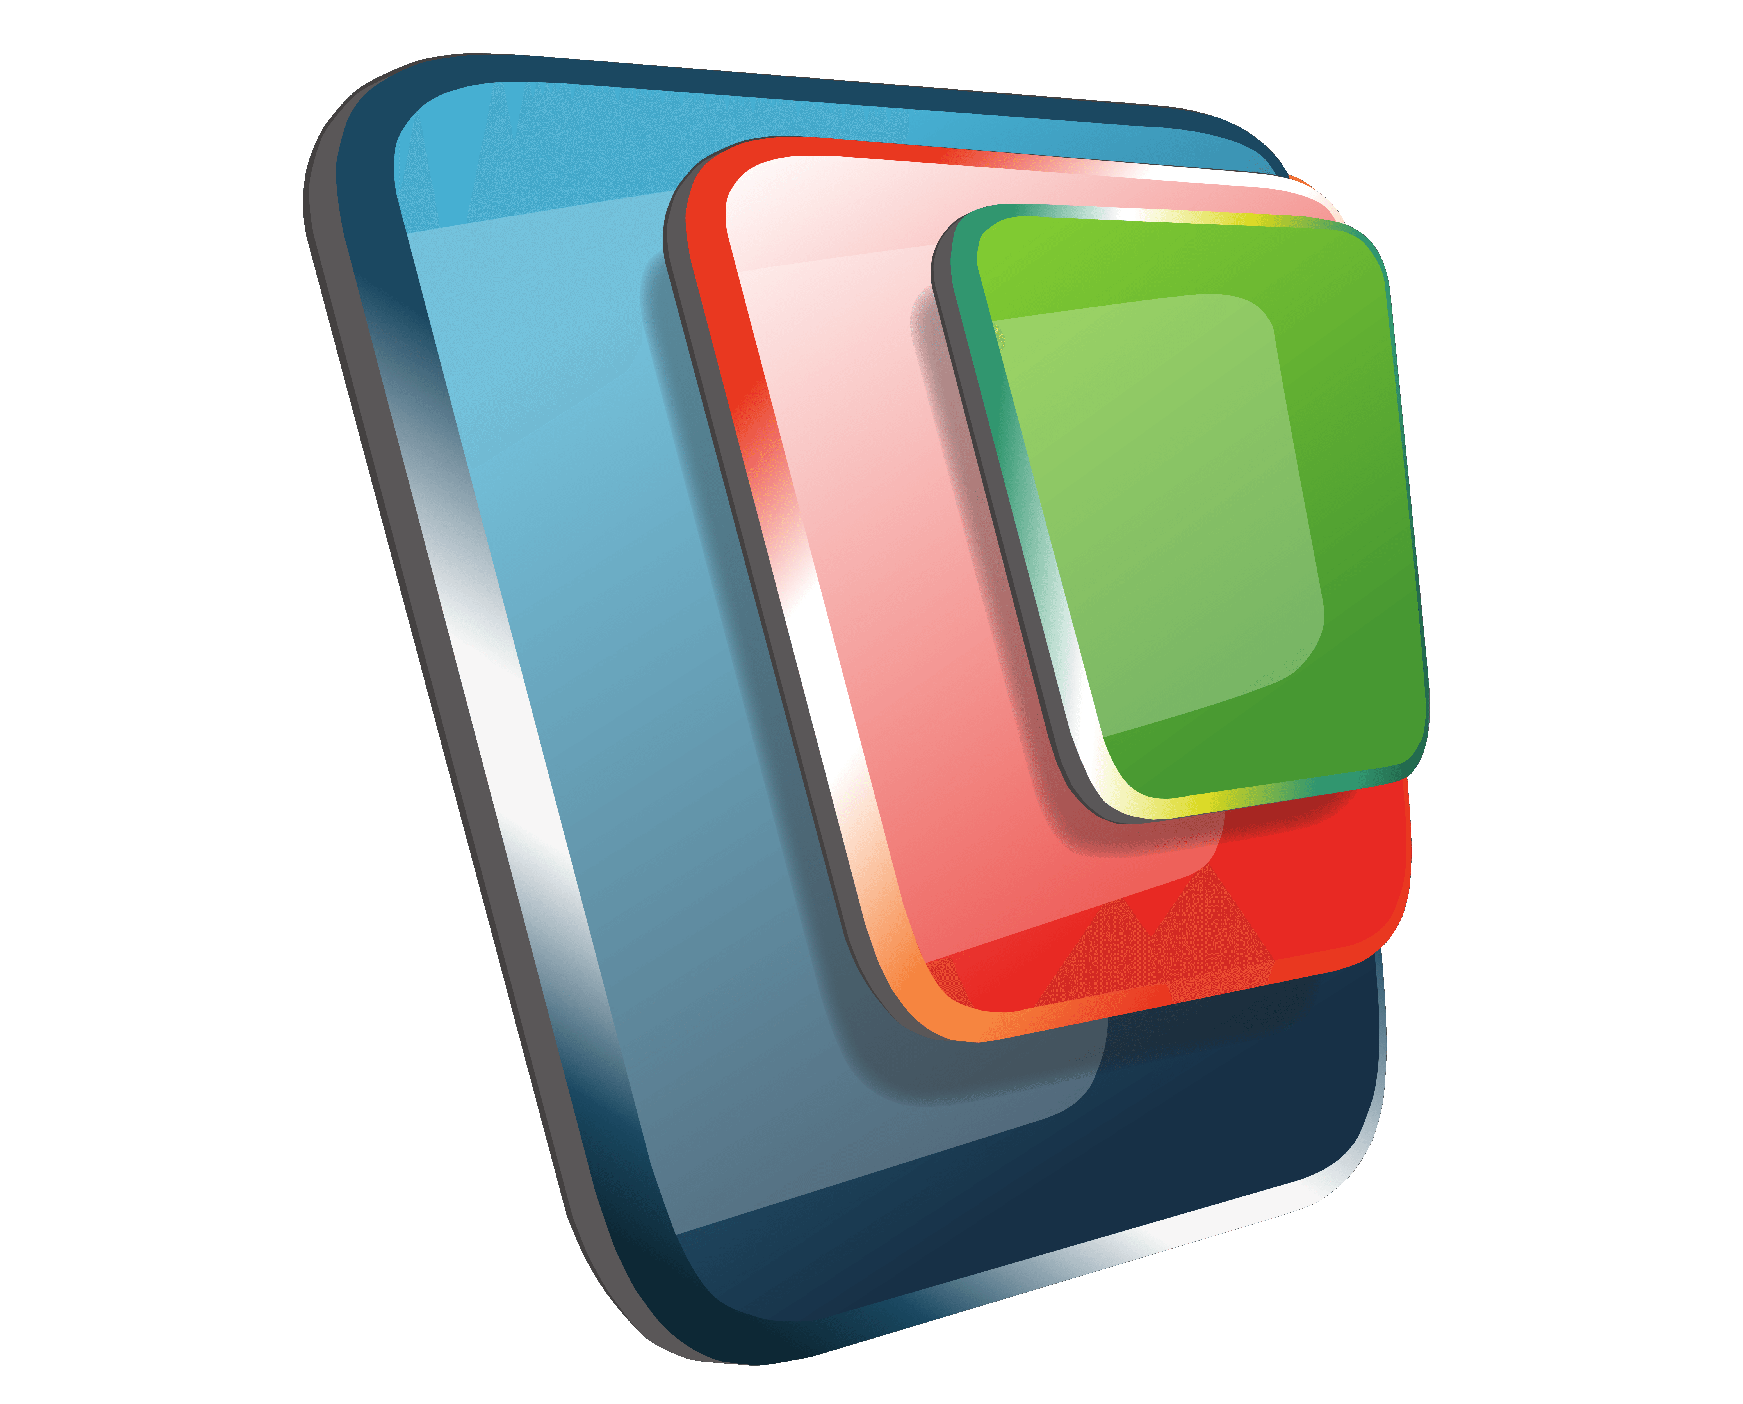 Workspace logo - green square on red on blue